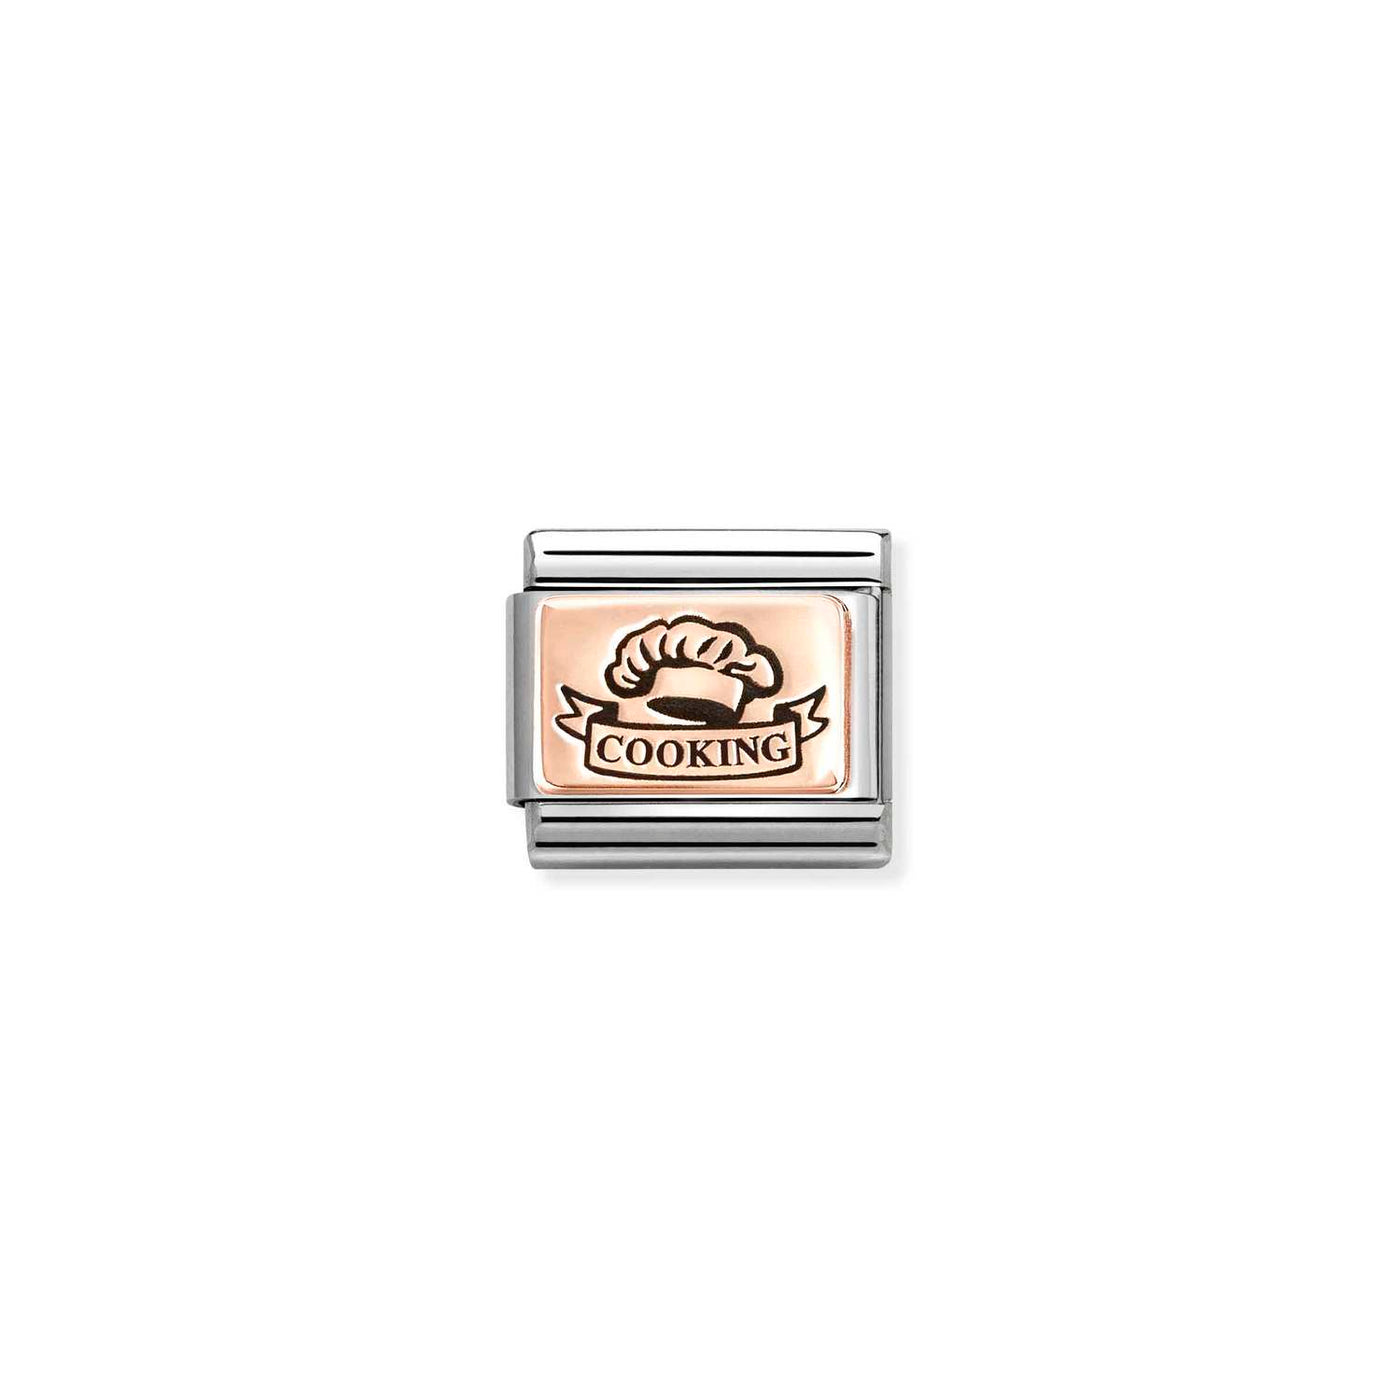 Nomination Classic 9ct Rose Gold Cooking Charm